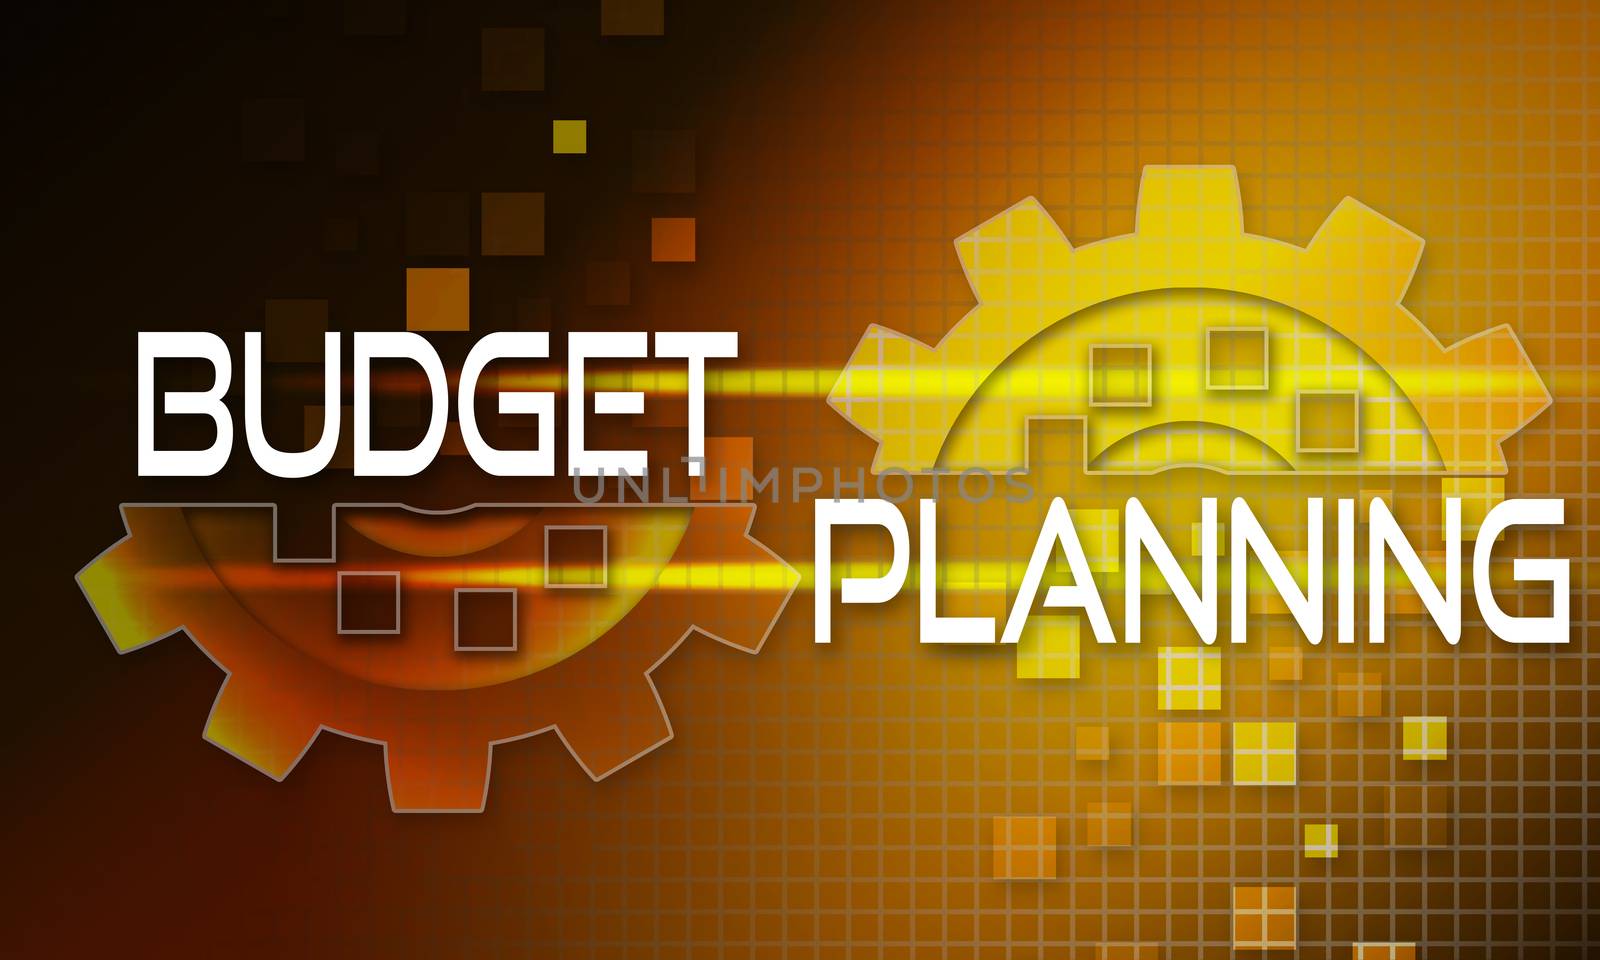 Budget planning concept text on the mechanism of gears. Technology background, 3d rendering.